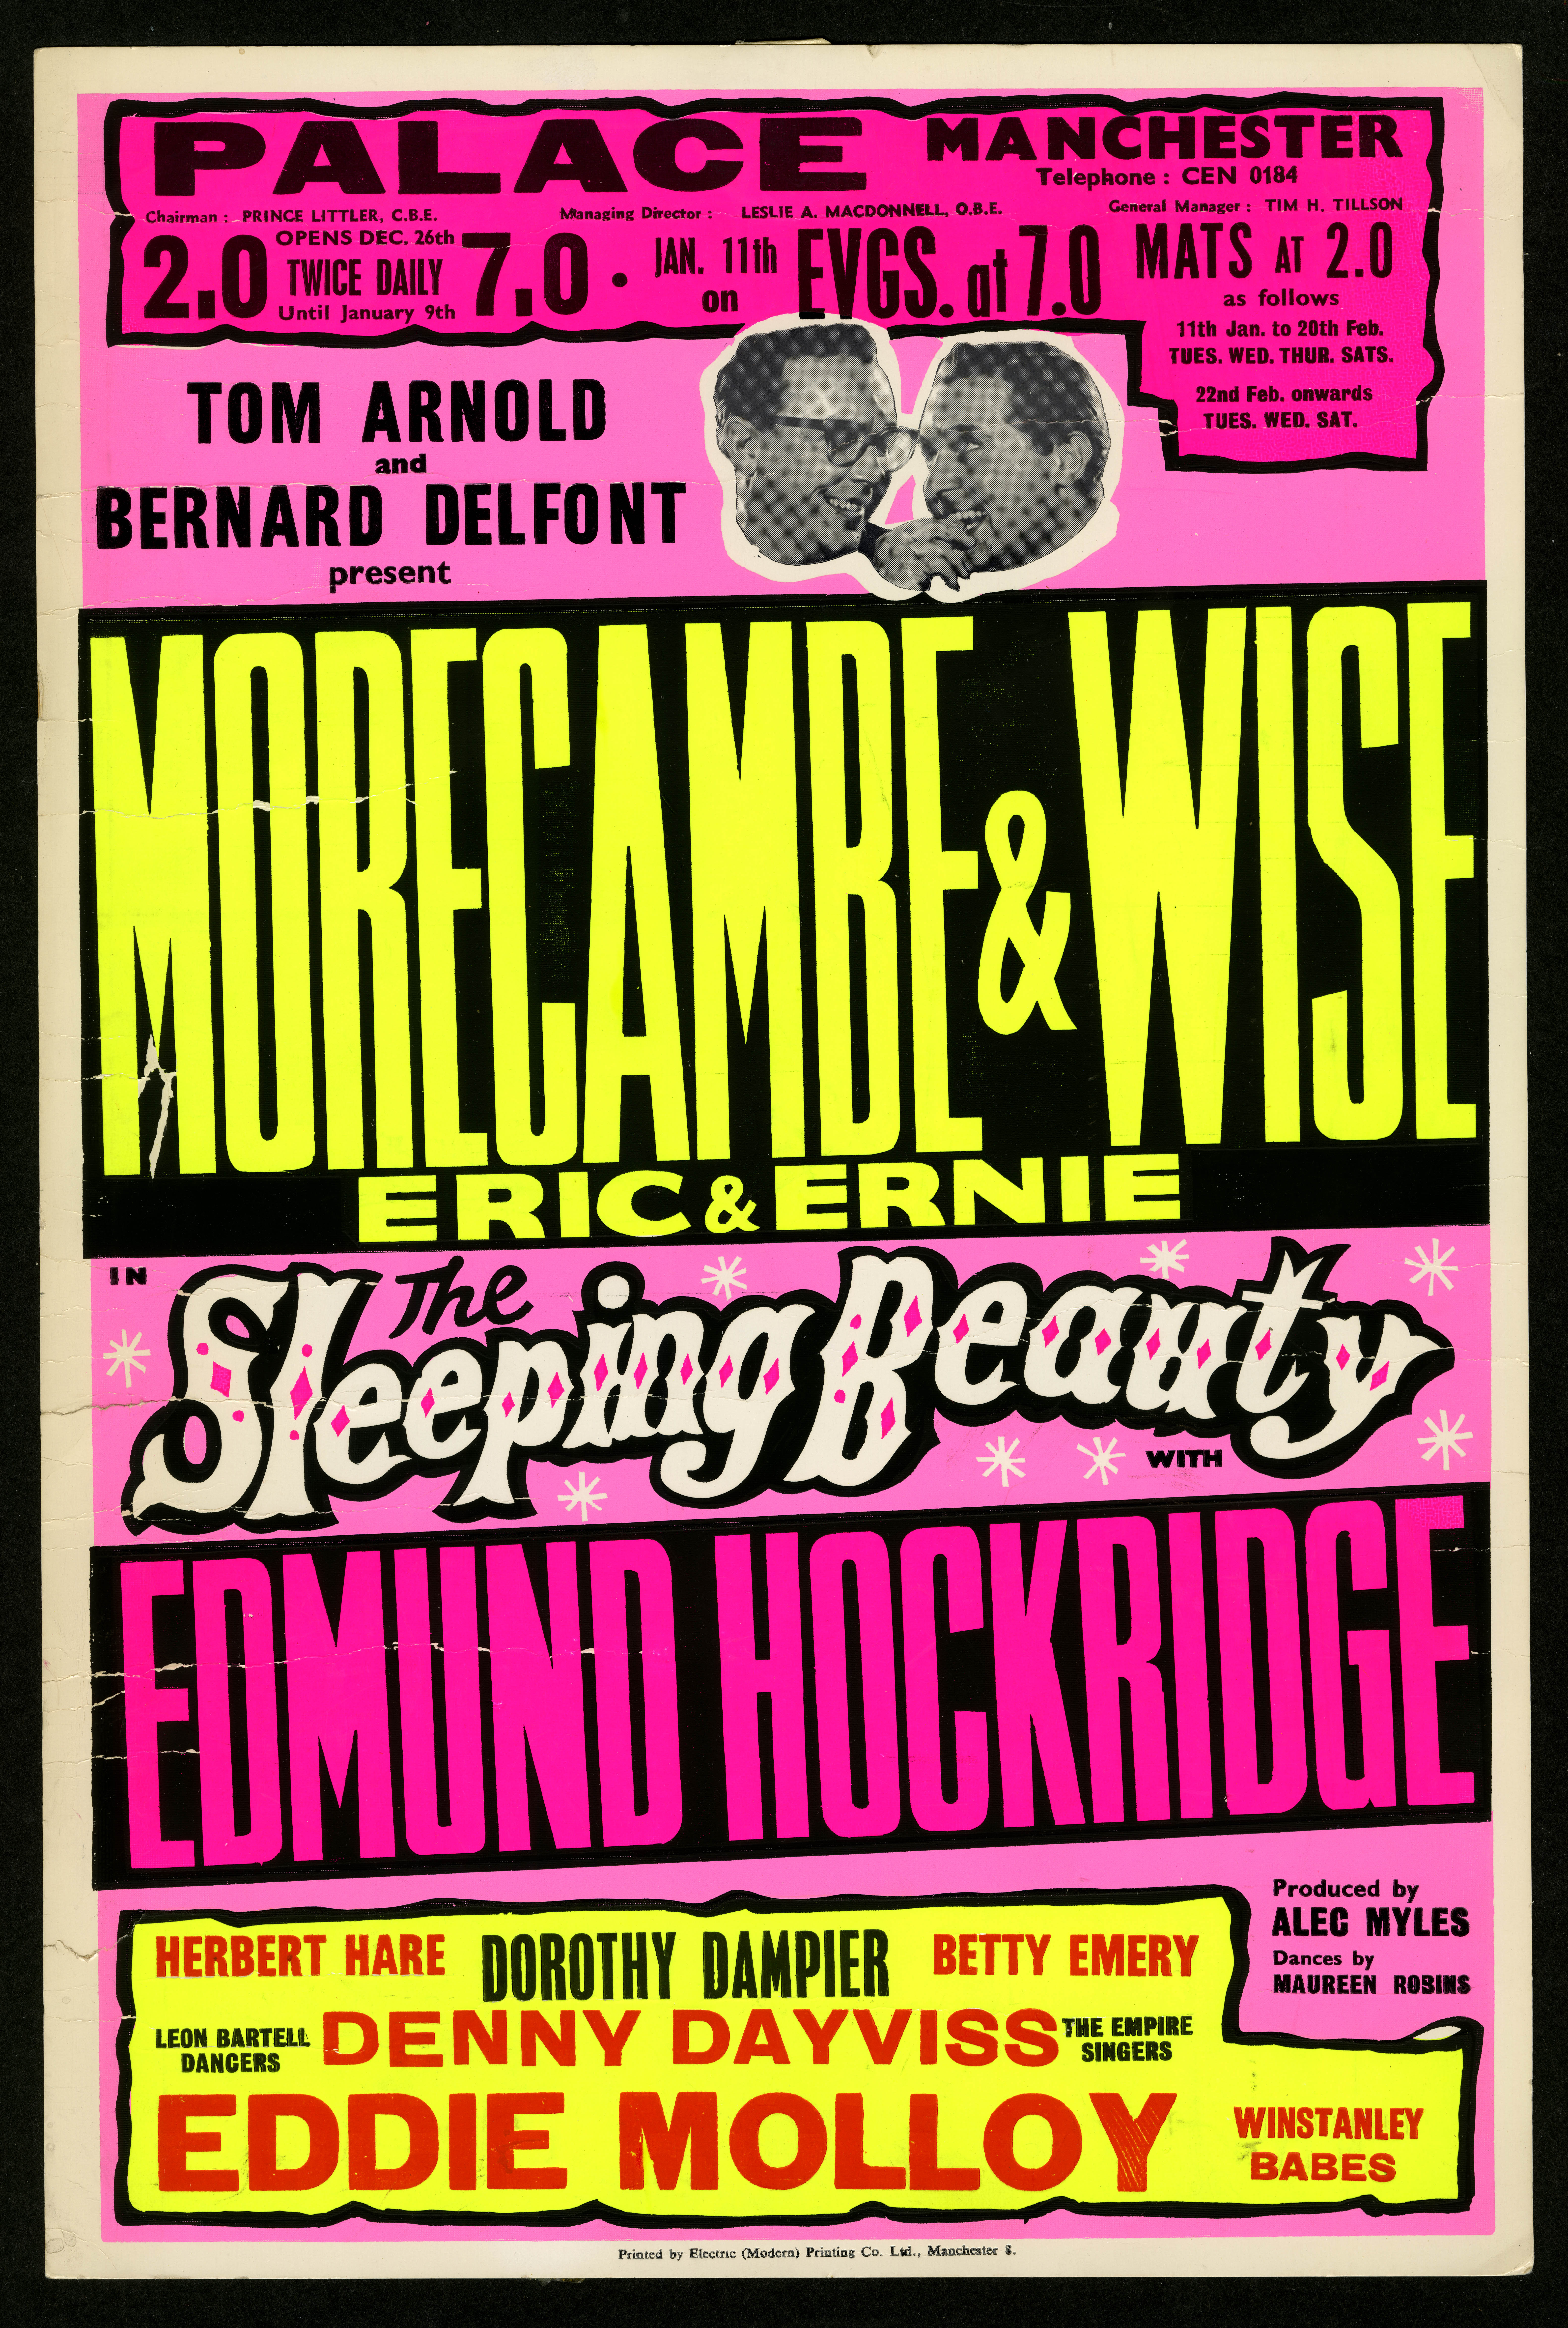 Poster for the pantomime 'Sleeping Beauty' at the Manchester Palace theatre starring comedians Morecambe and Wise (David Drummond Pantomime Collection)